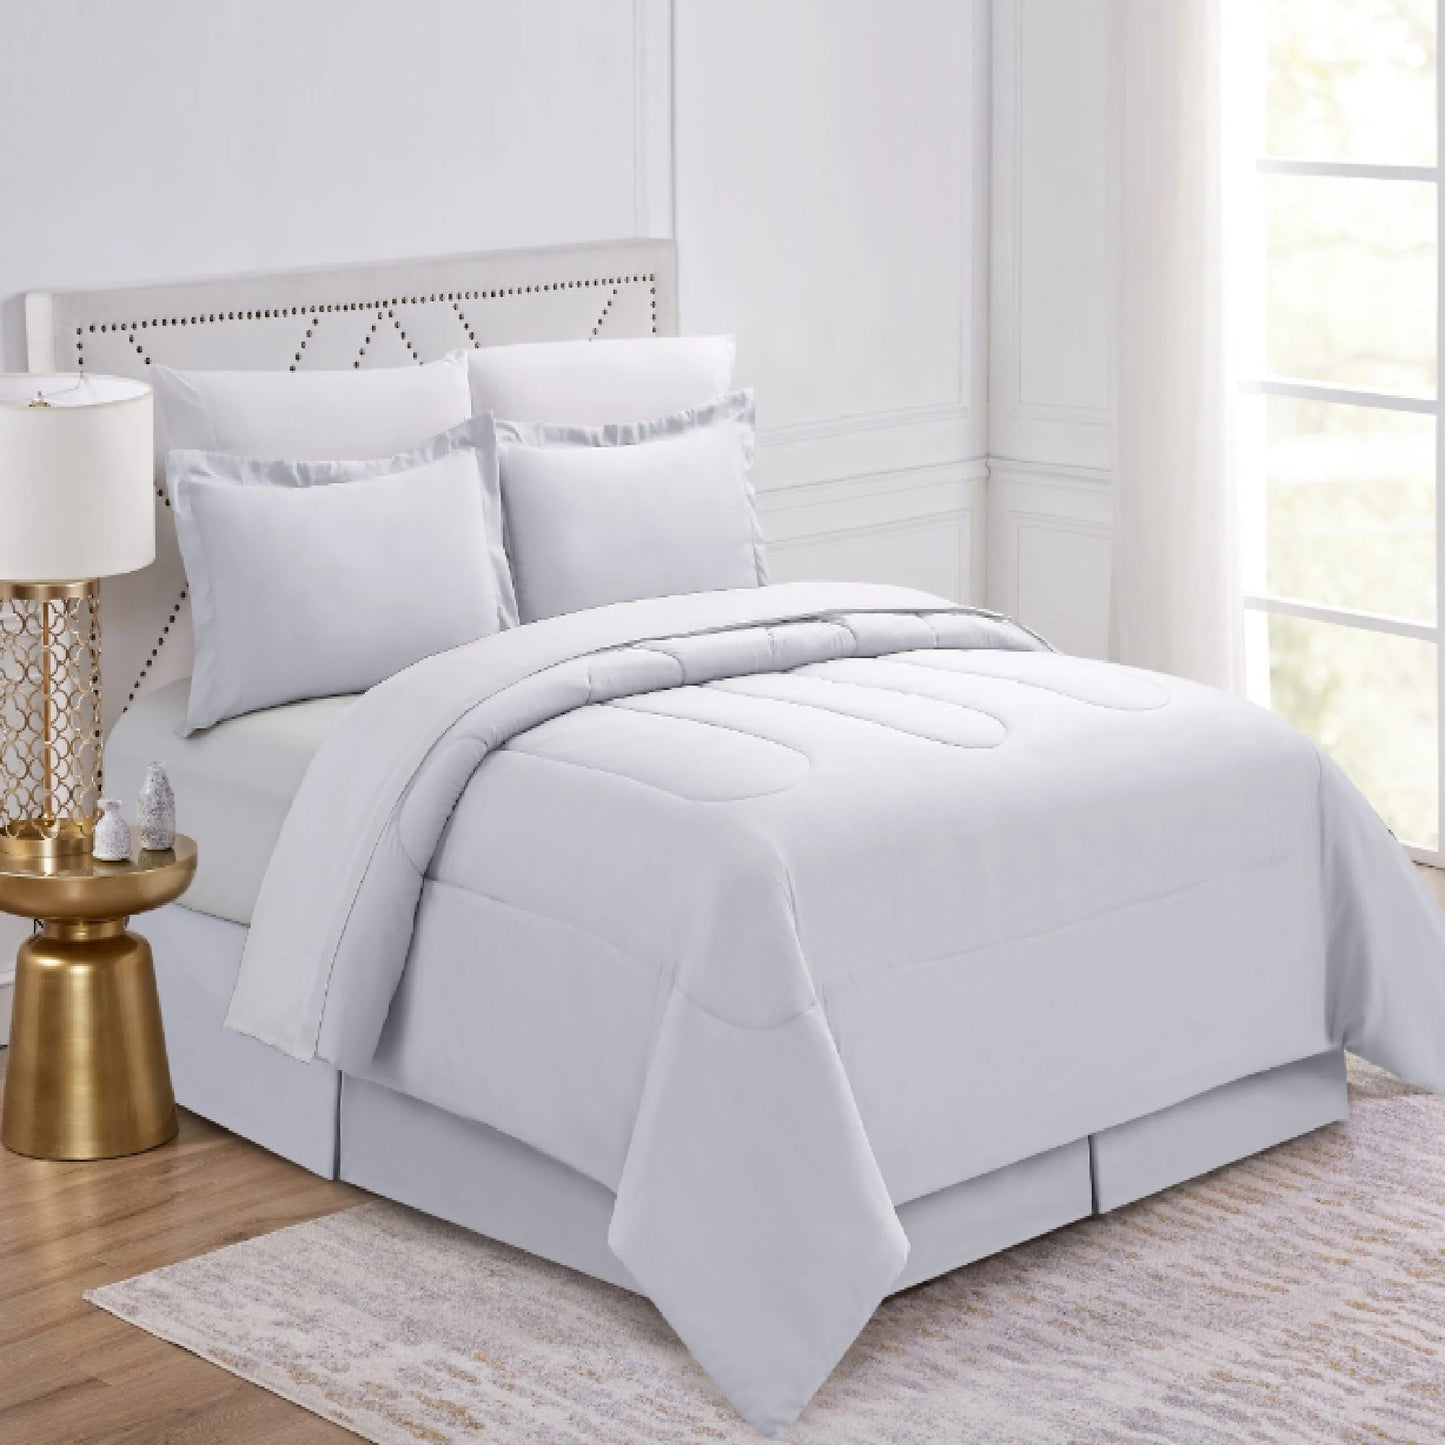 Opulent 8pc Pinch Pleat Comforter Set for a Luxurious Bedroom white